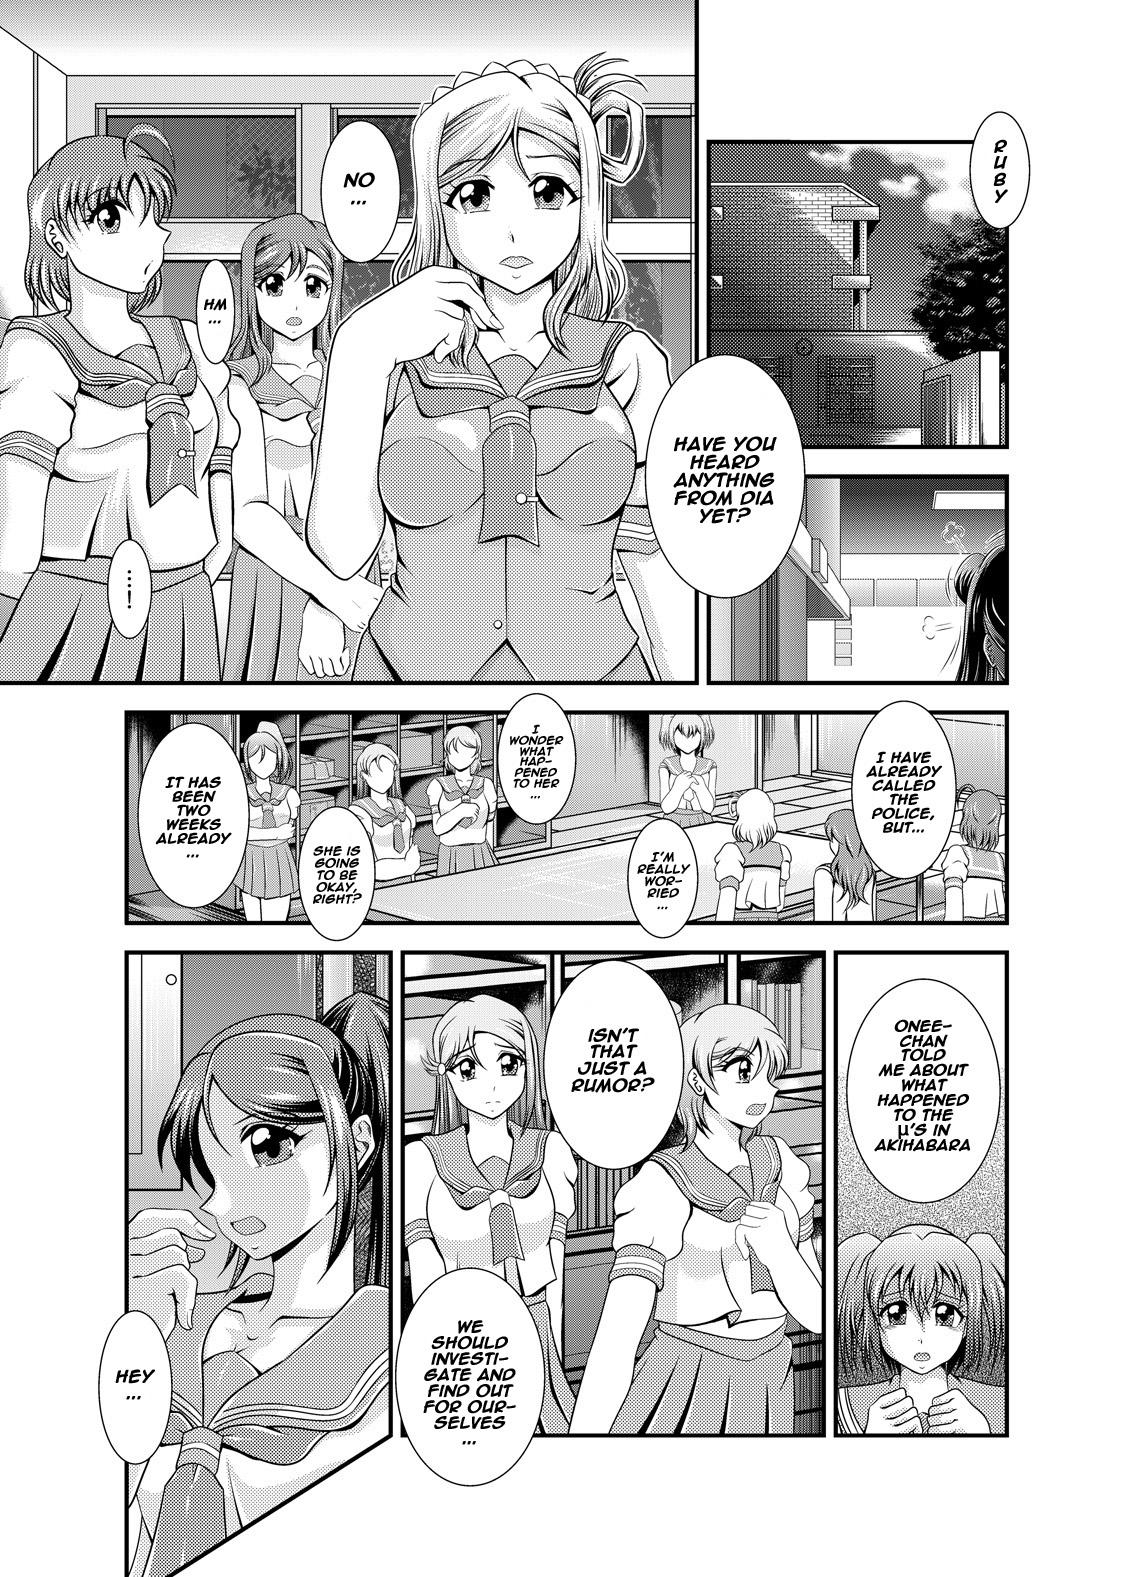 Phat ProjectAqours EP01DIAMONDS - Love live sunshine Tight Cunt - Page 3